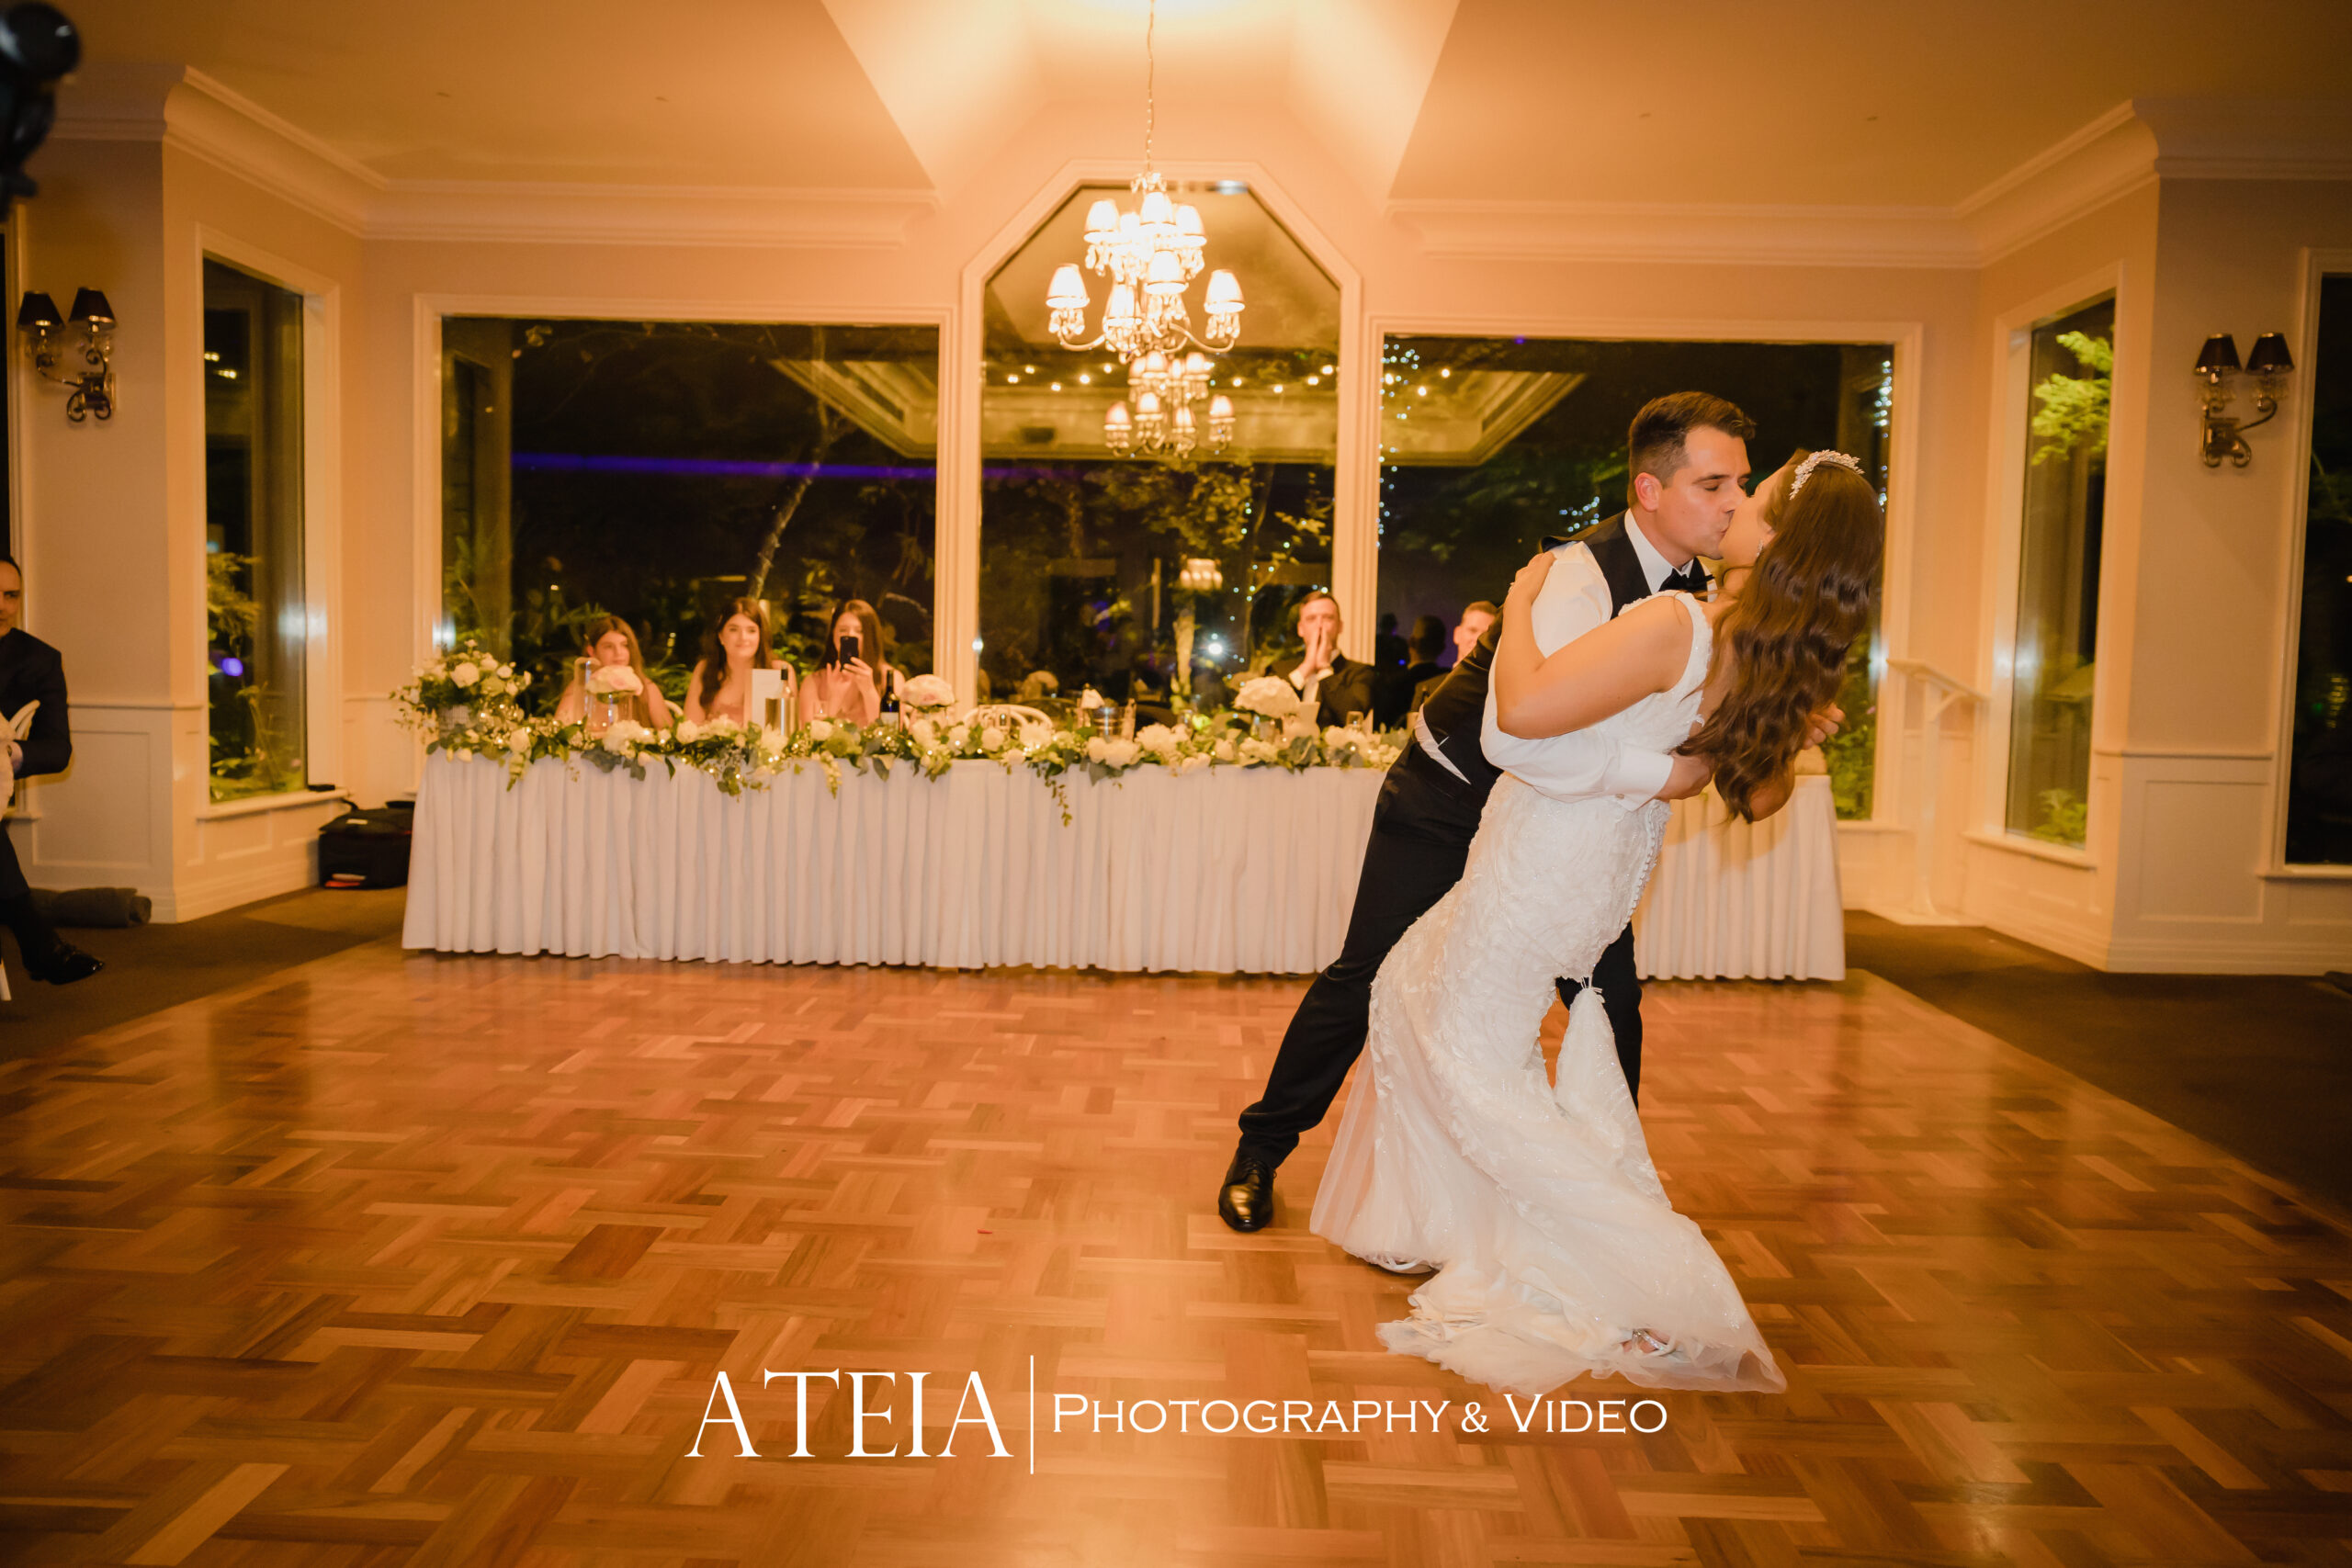 , Natalie and Riccardo&#8217;s wedding at Lyrebird Falls captured by ATEIA Photography &#038; Video